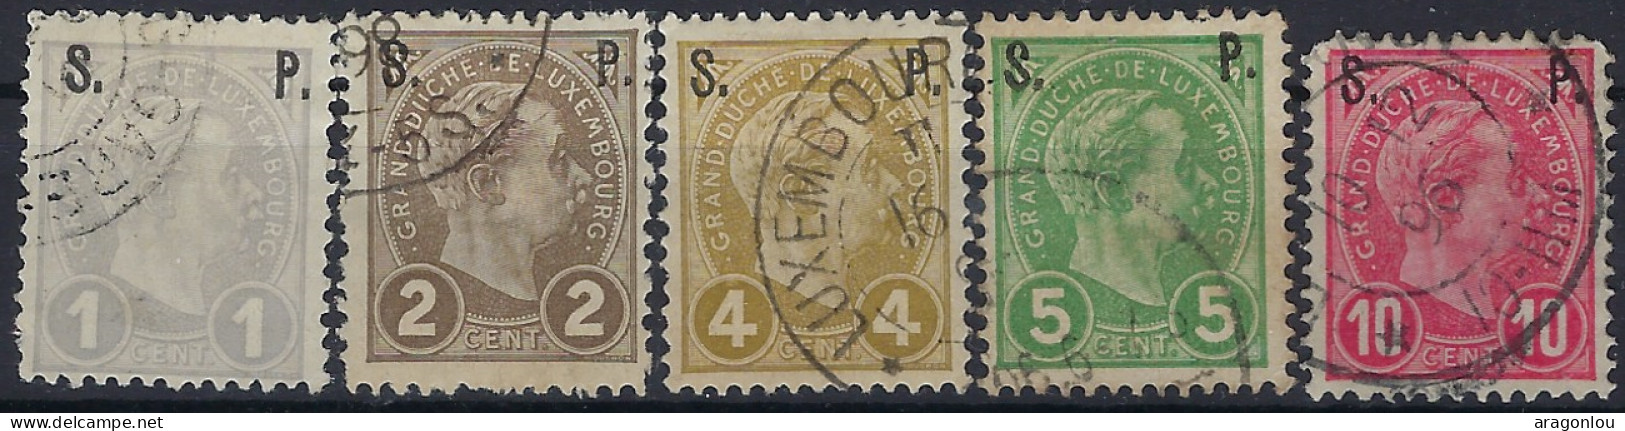 Luxembourg - Luxemburg - Timbres - 1895   Adolphe Profil   S.P.  Satz   °   VC 50,- - 1895 Adolphe Right-hand Side